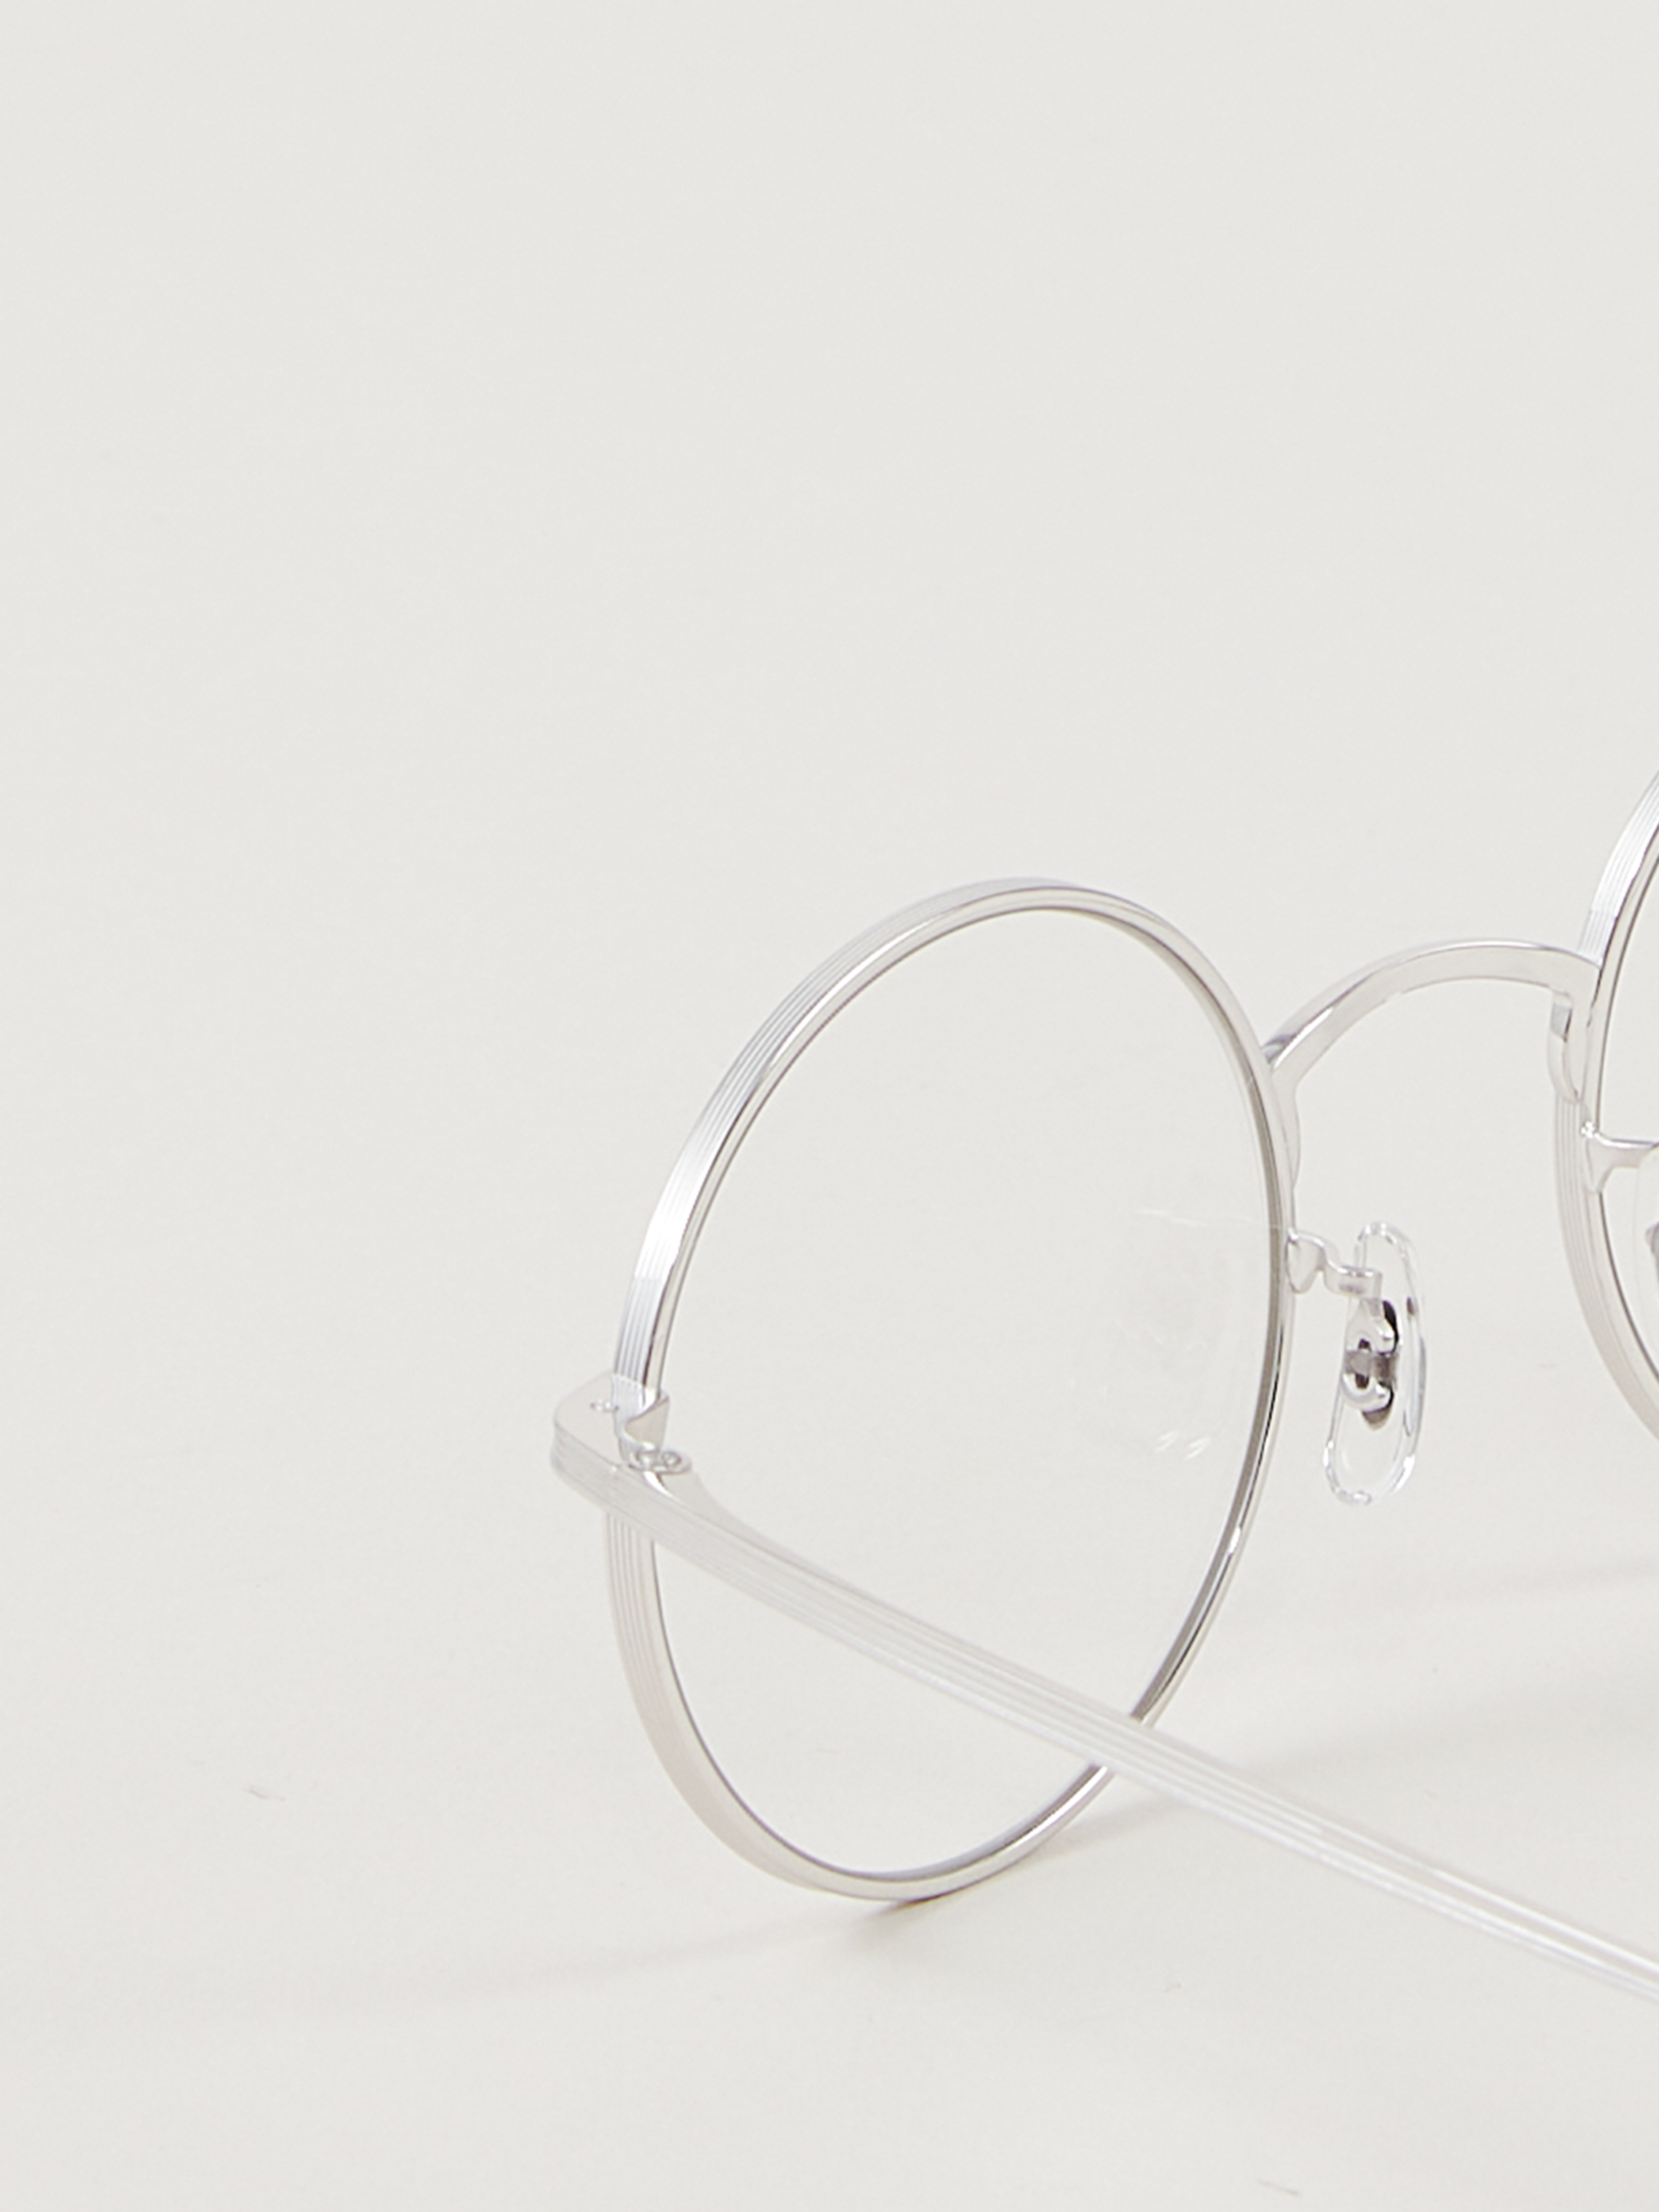 Oliver Peoples Glasses 'After Midnight' Silver | Sunglasses